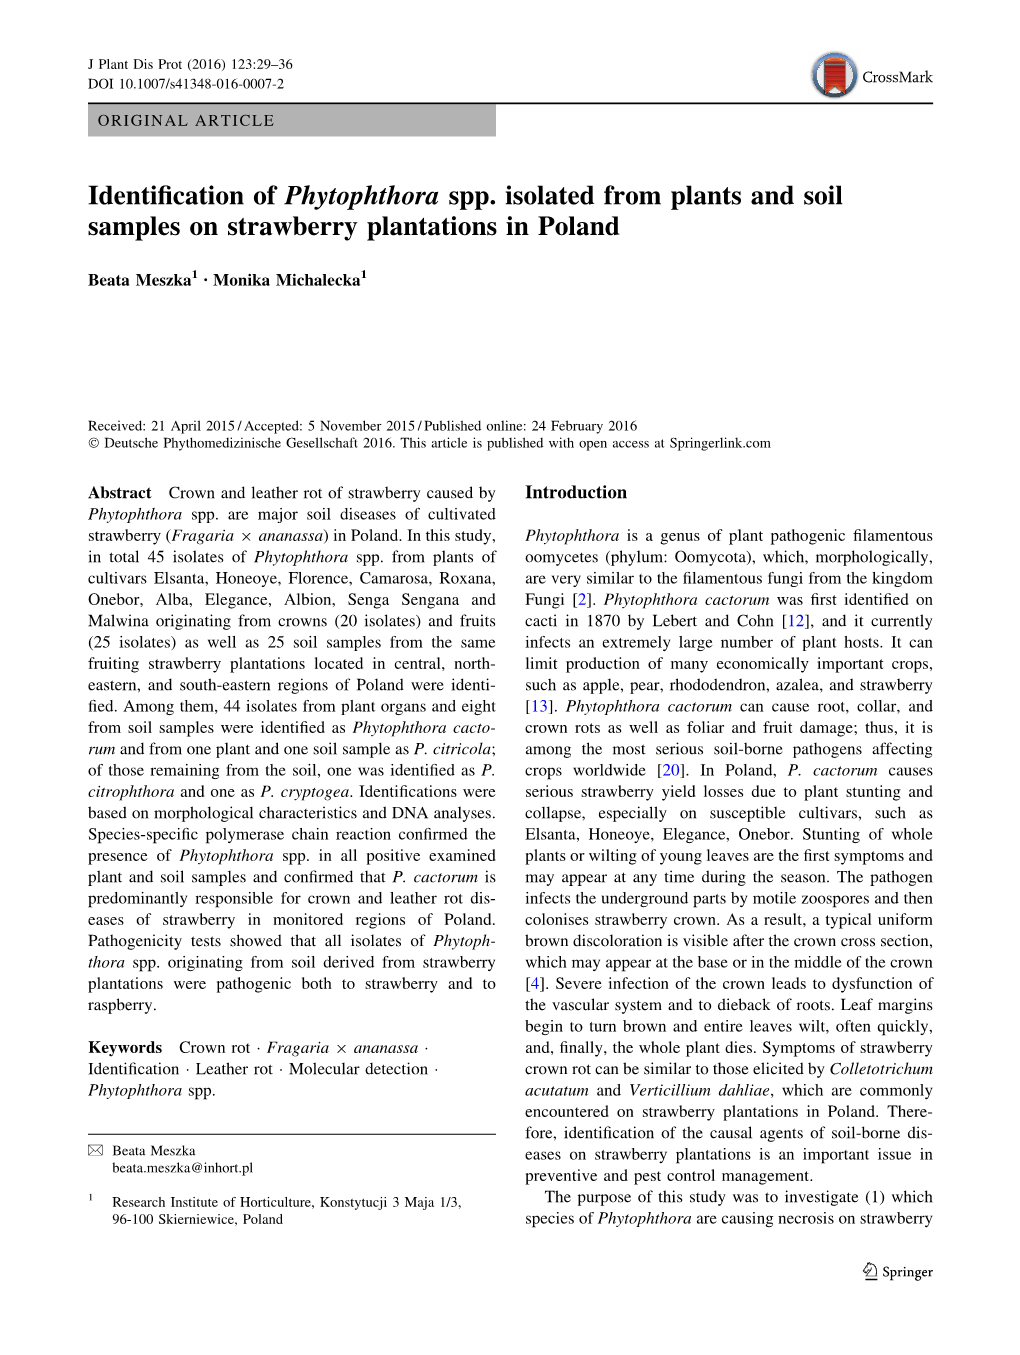 Identification of Phytophthora Spp. Isolated from Plants and Soil